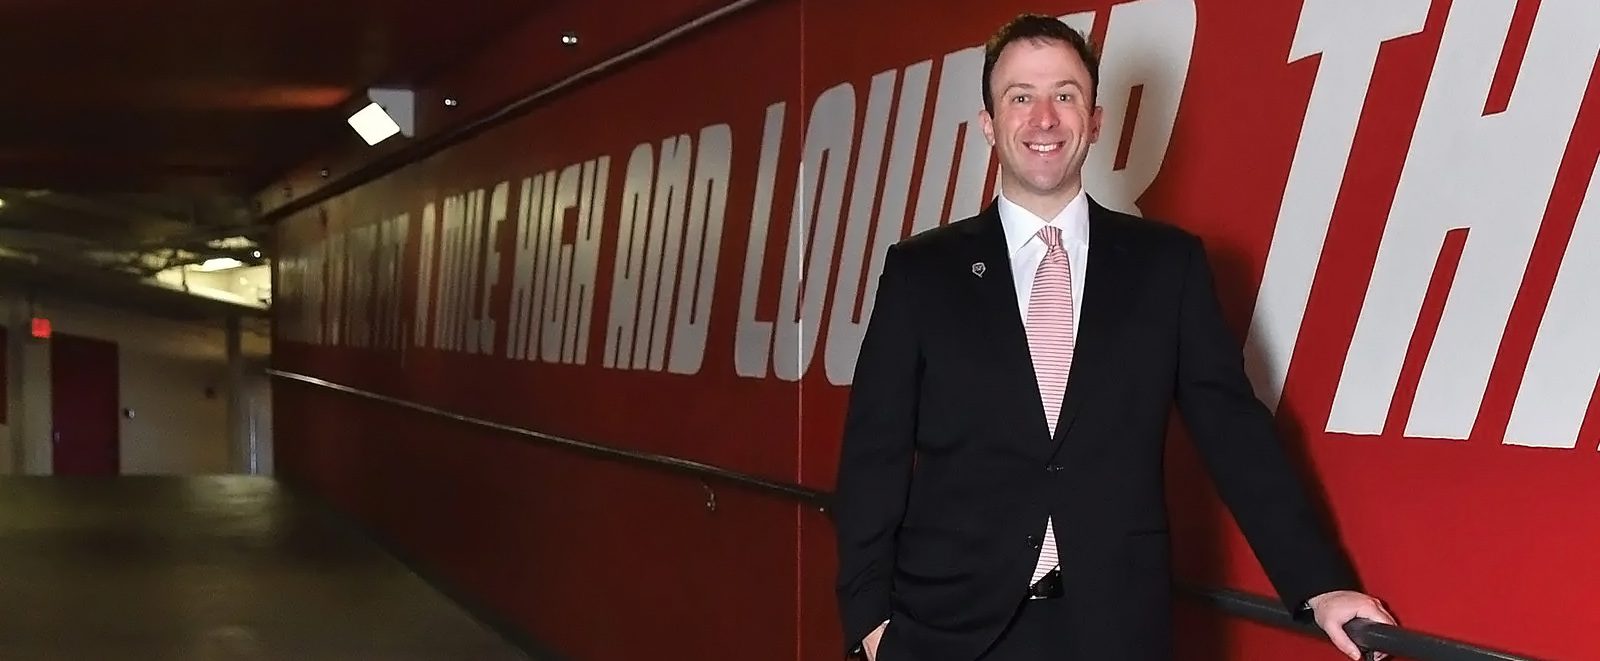 UNM men's basketball coach wearing a suit in the hallway of the Pit arena